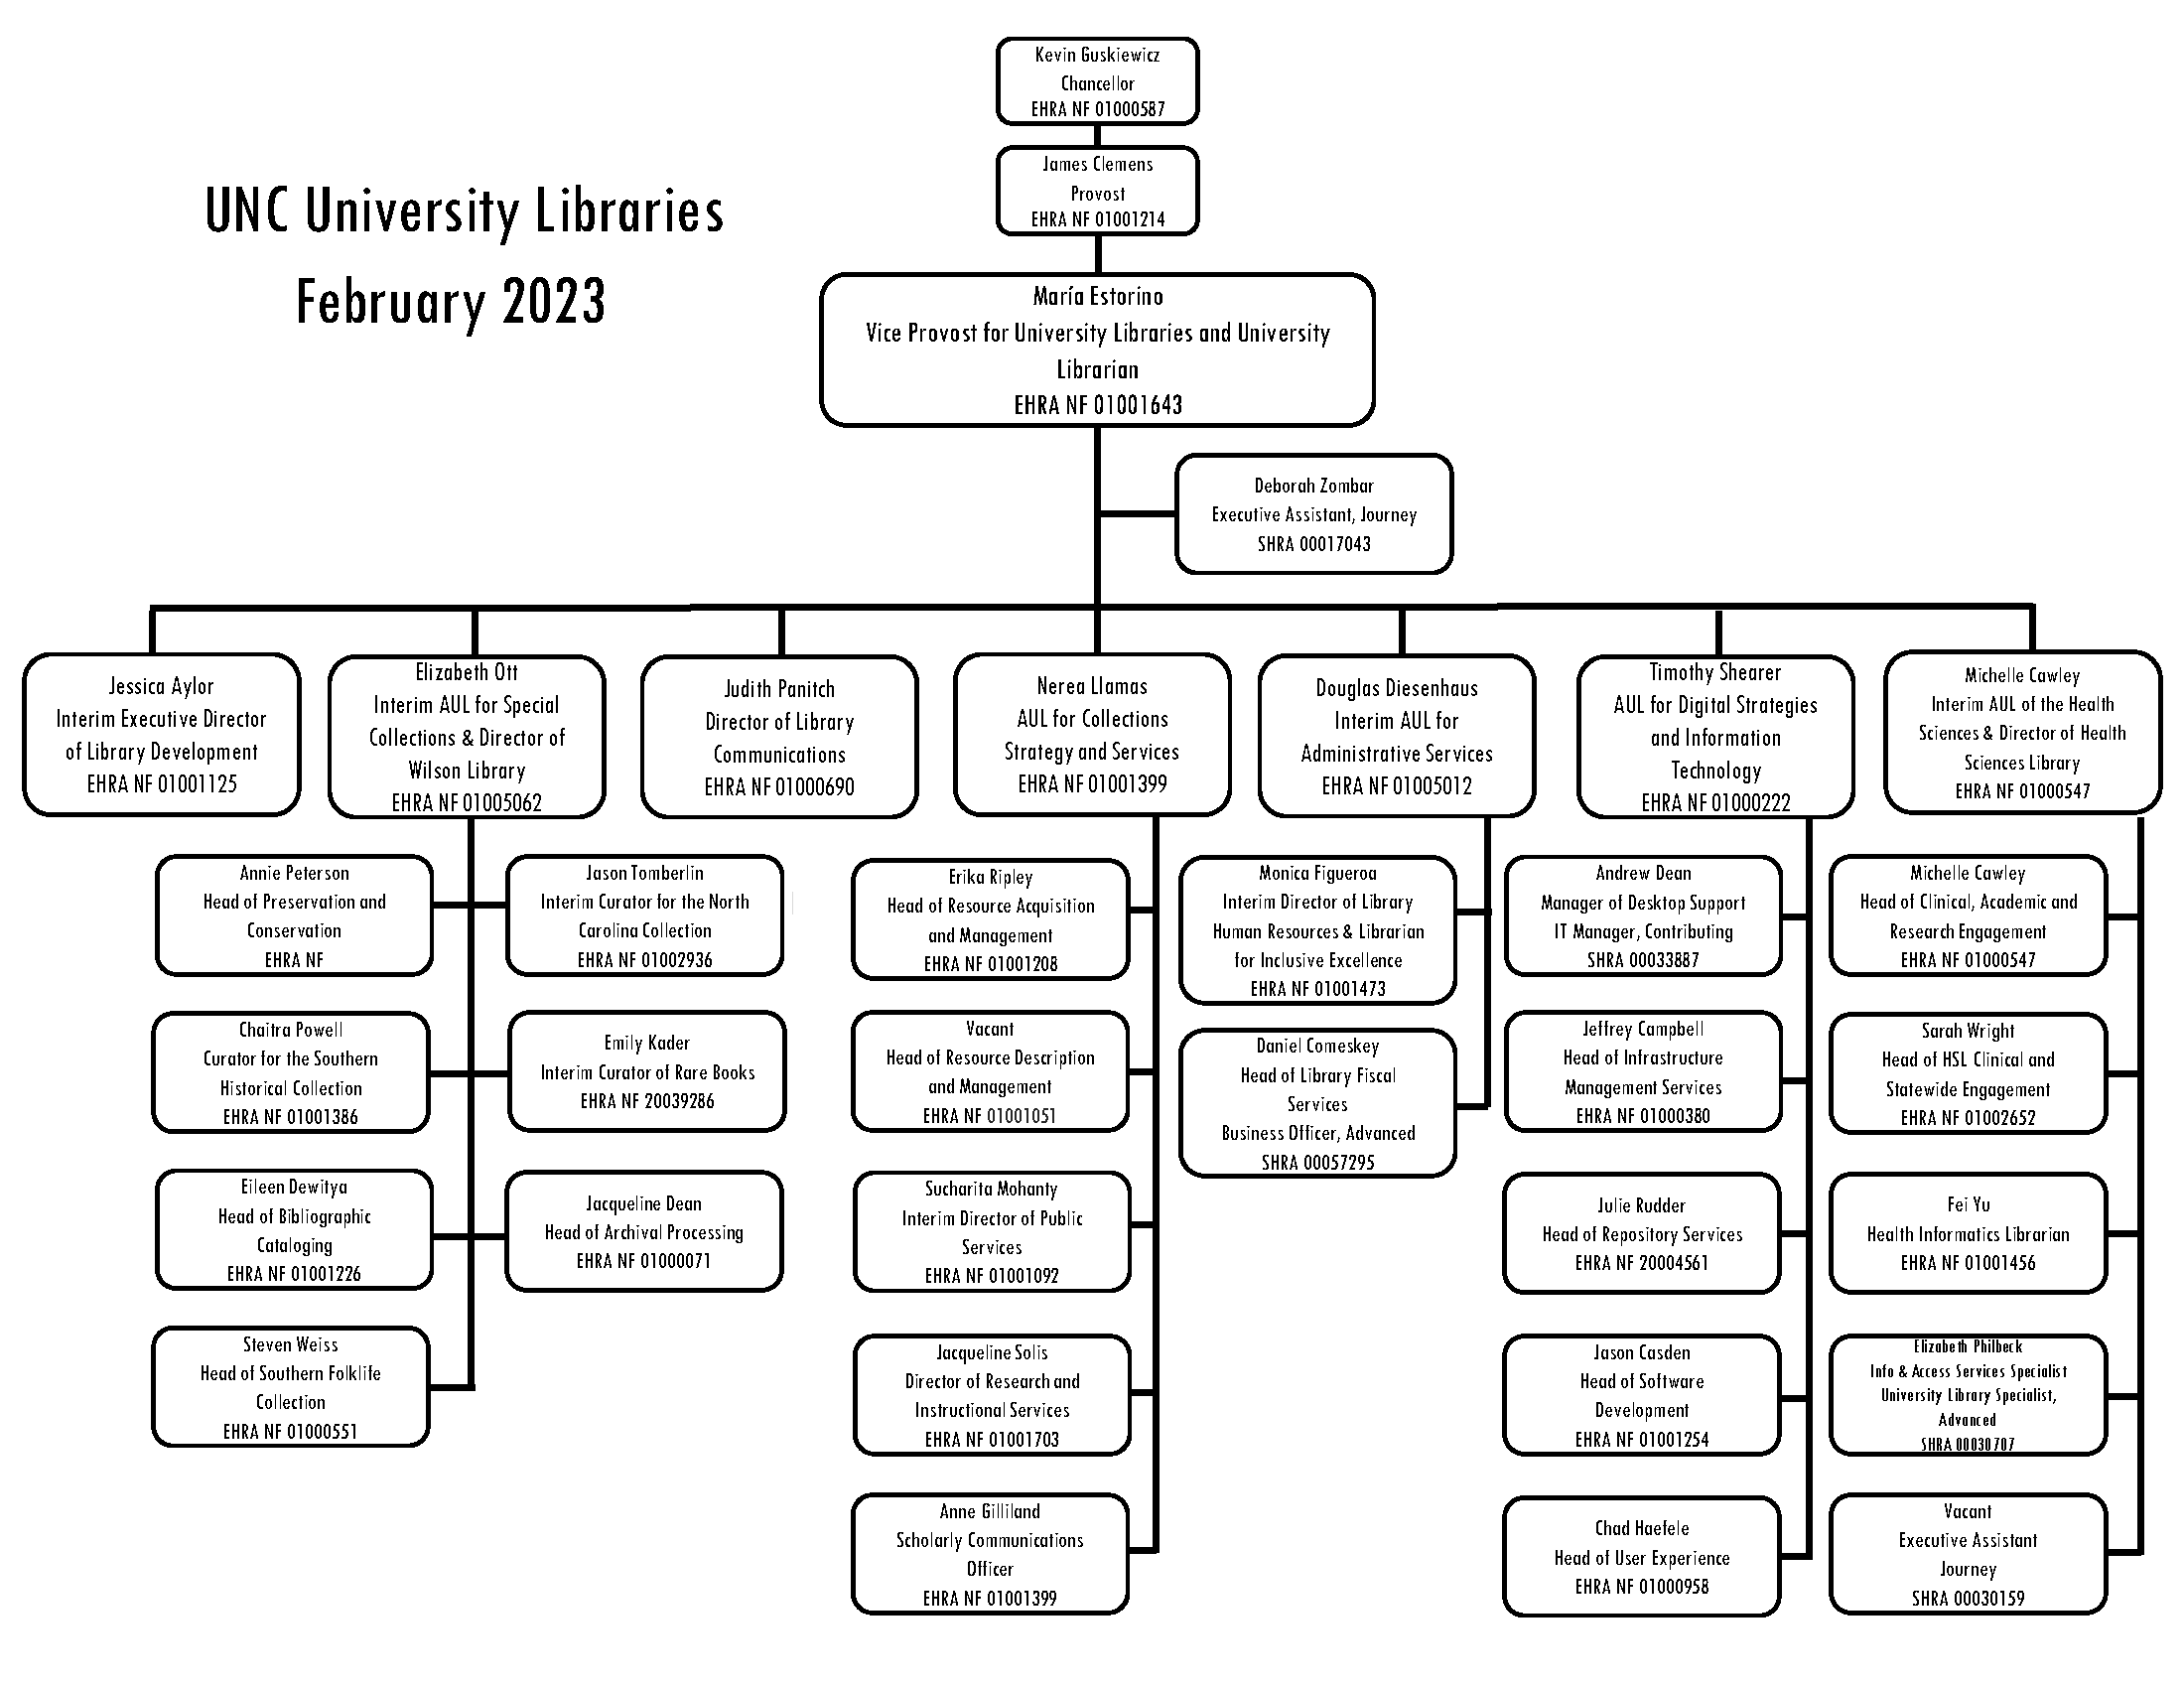 chart of reporting structure within the Libraries. See the text description link for more information.